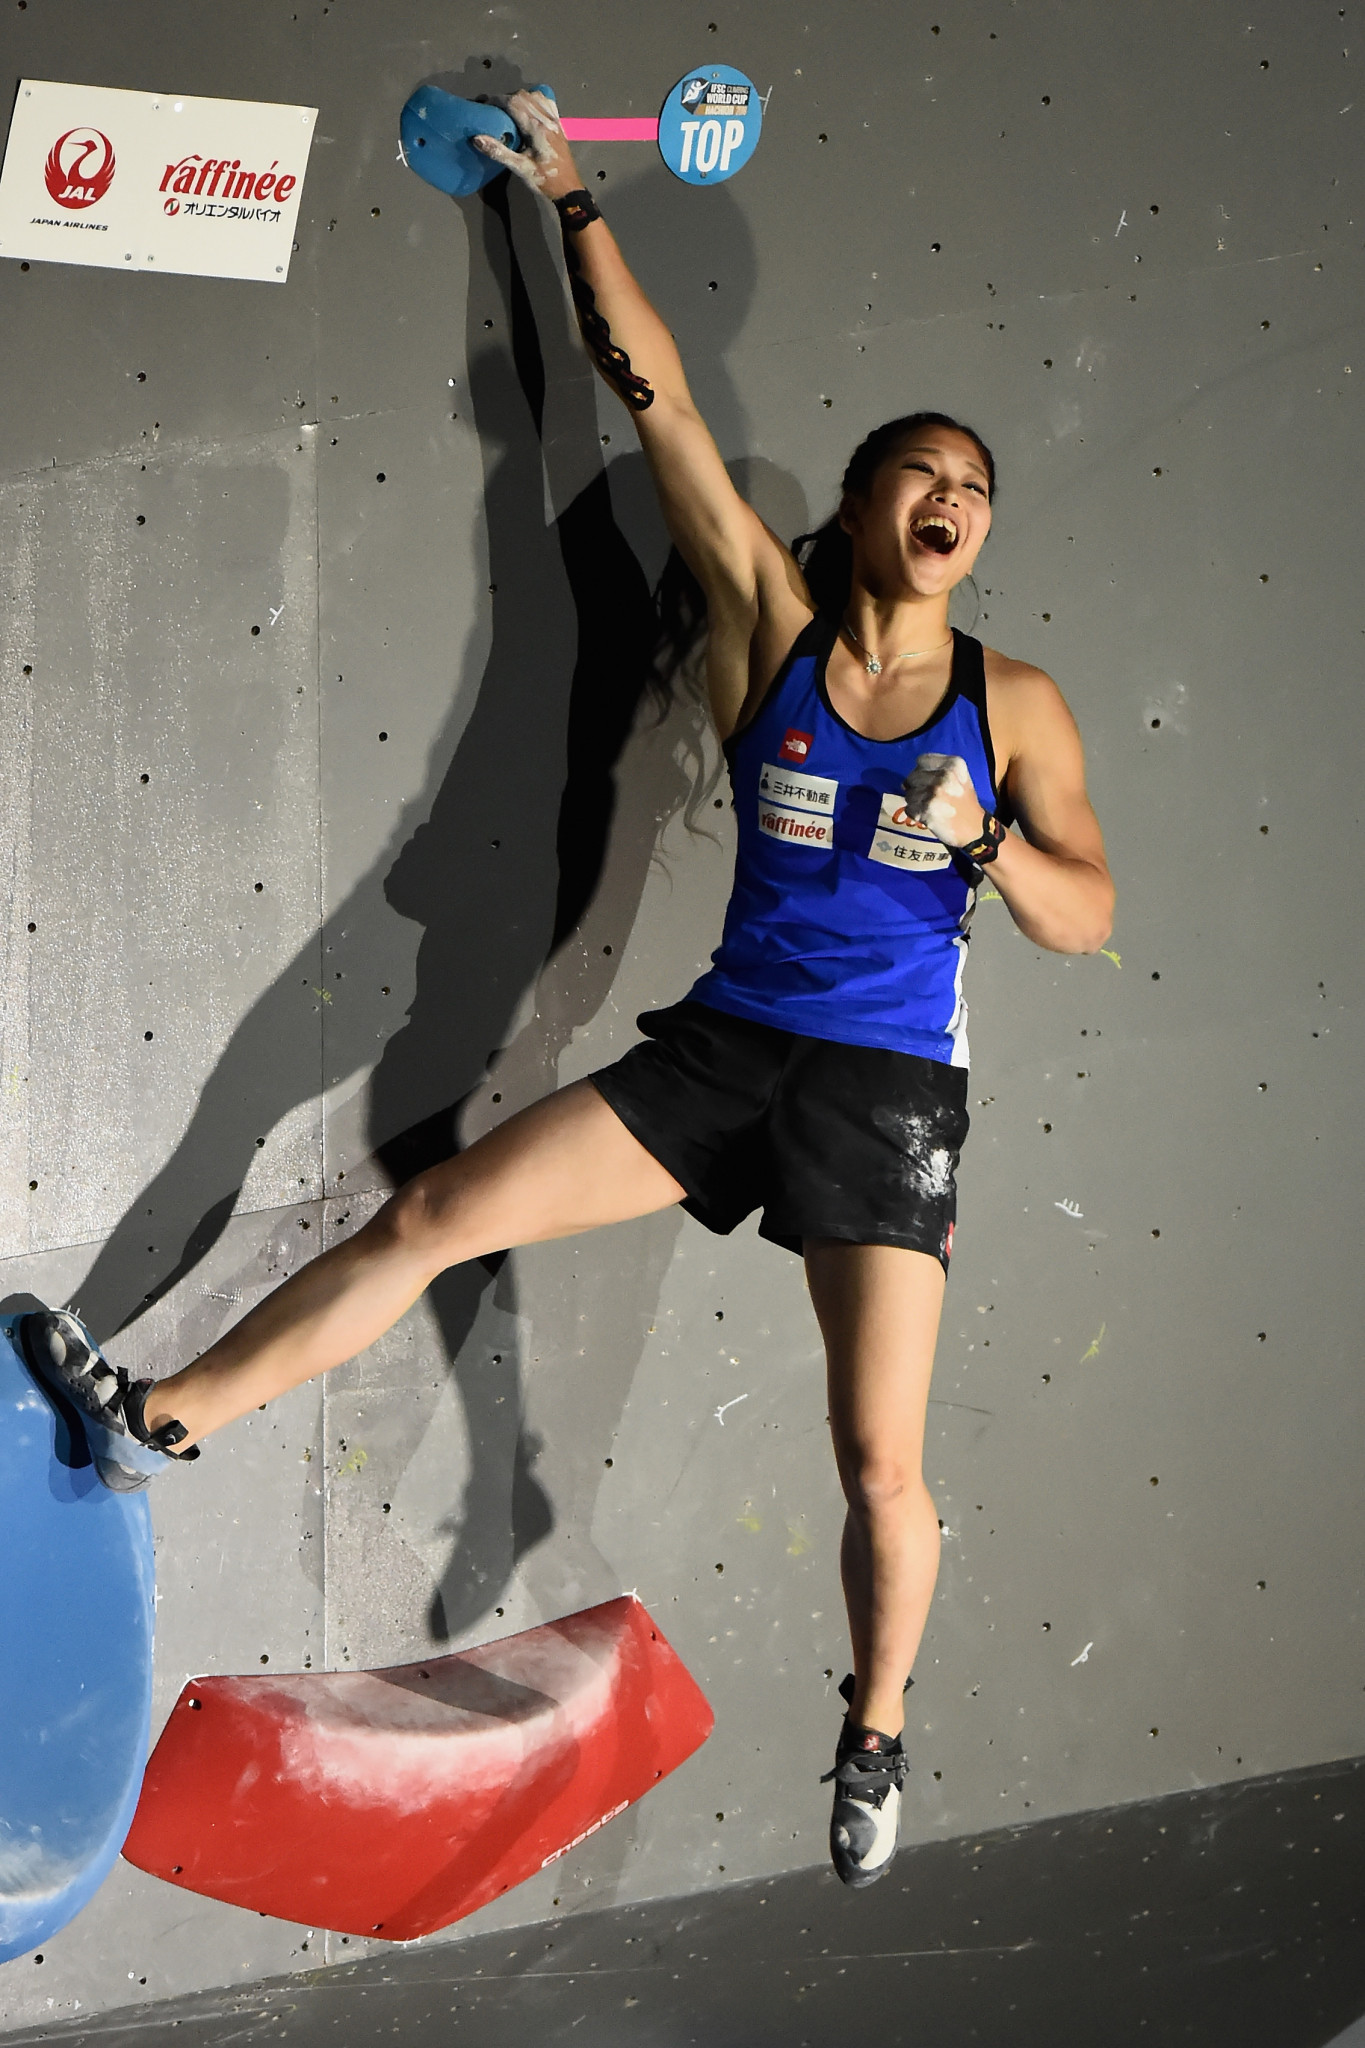 Japan's Miho Nonaka has won the women's IFSC Bouldering World Cup title ©Getty Images  